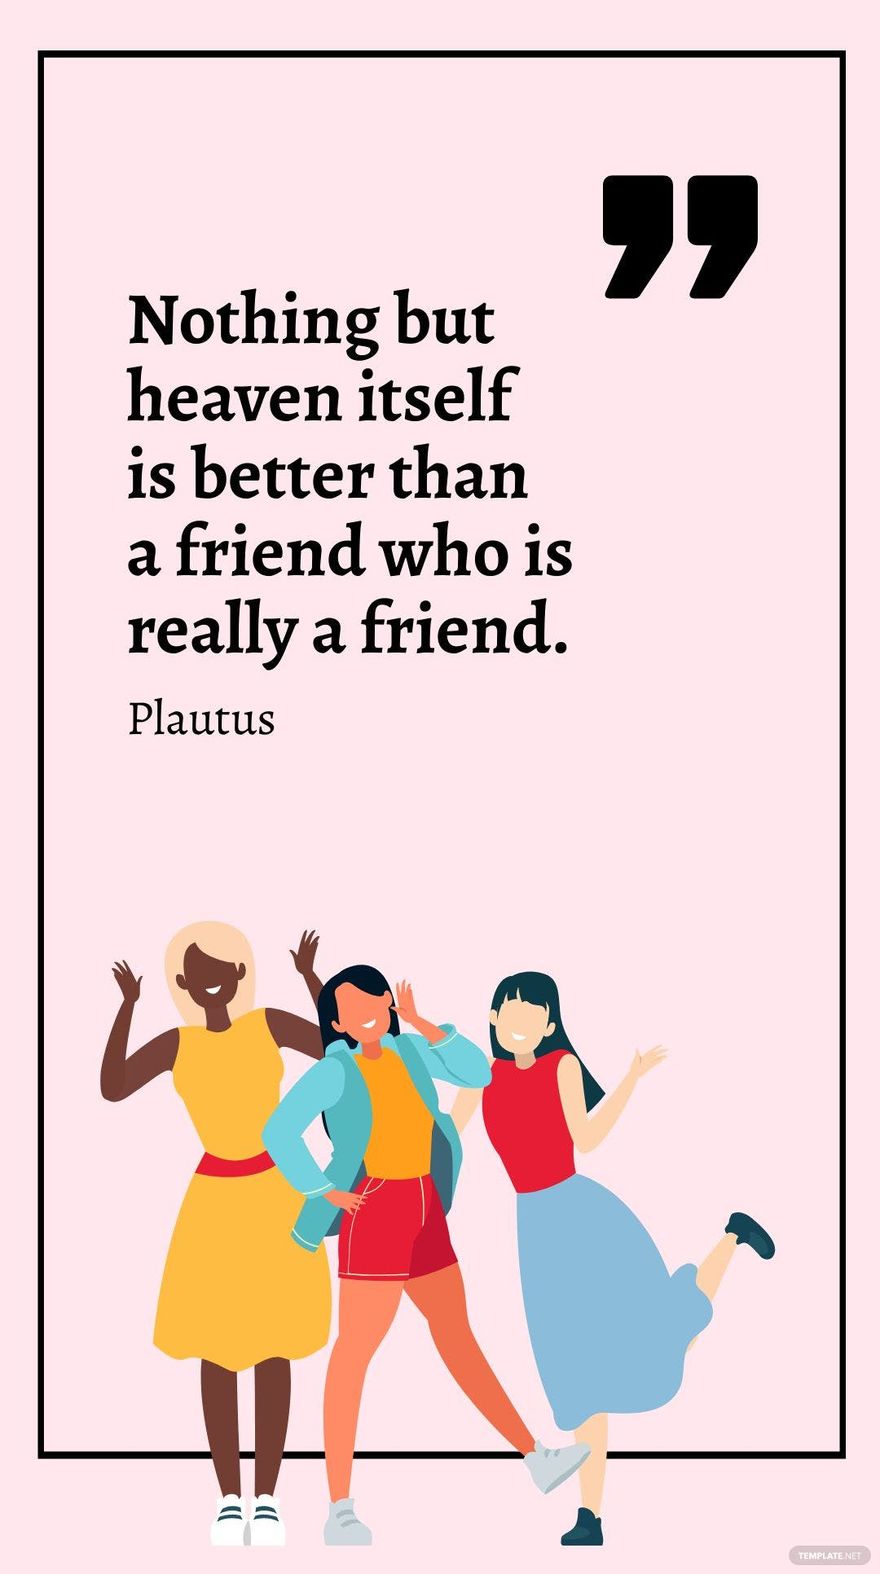 Plautus - Nothing but heaven itself is better than a friend who is really a friend.